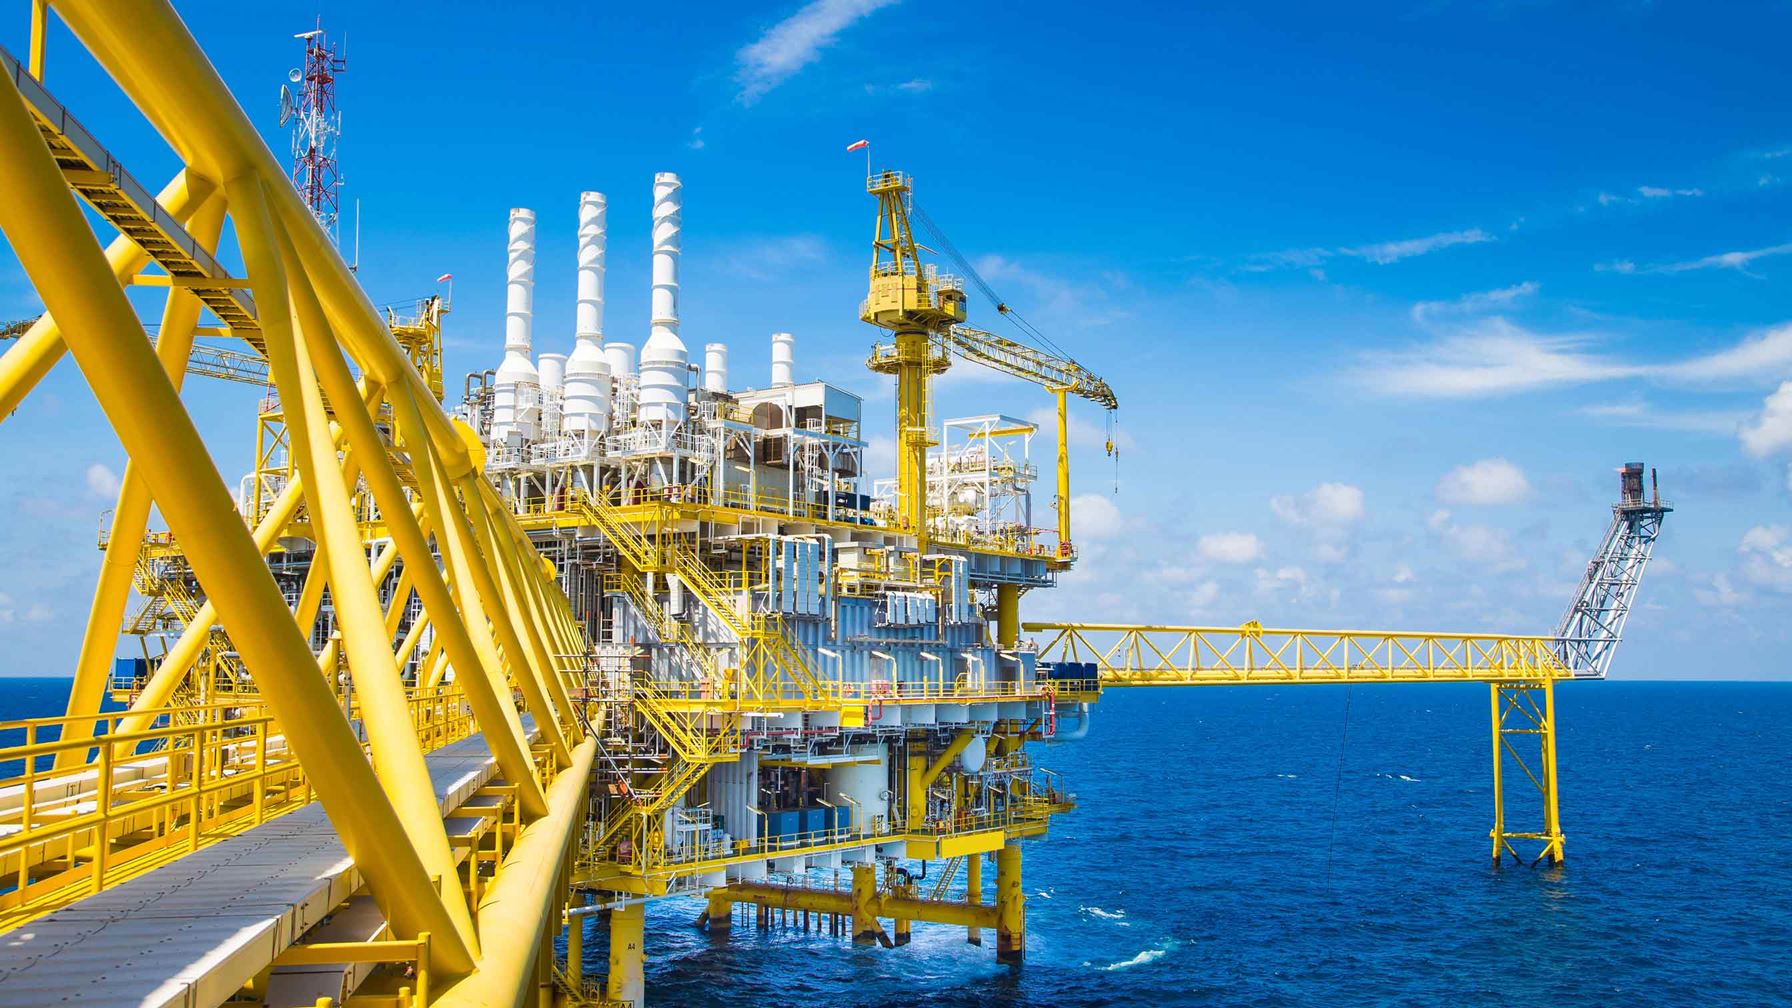 Thorough testing and proven power for offshore platform